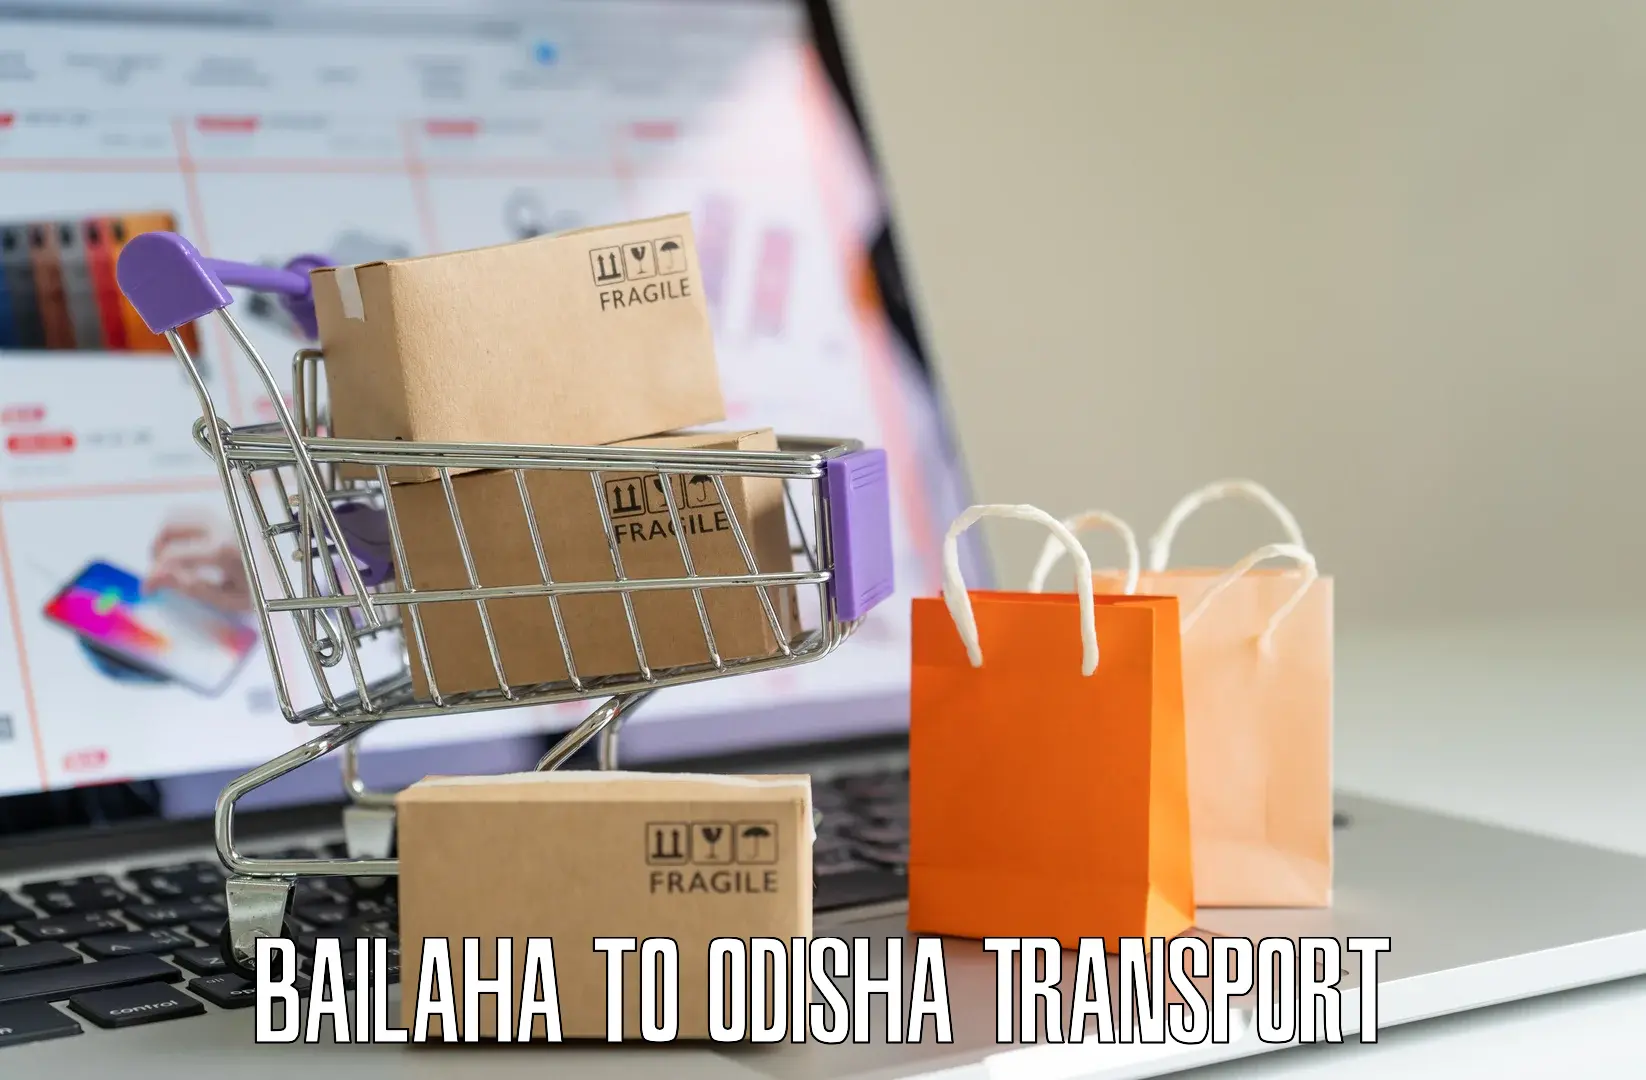 Transport in sharing Bailaha to Boudh